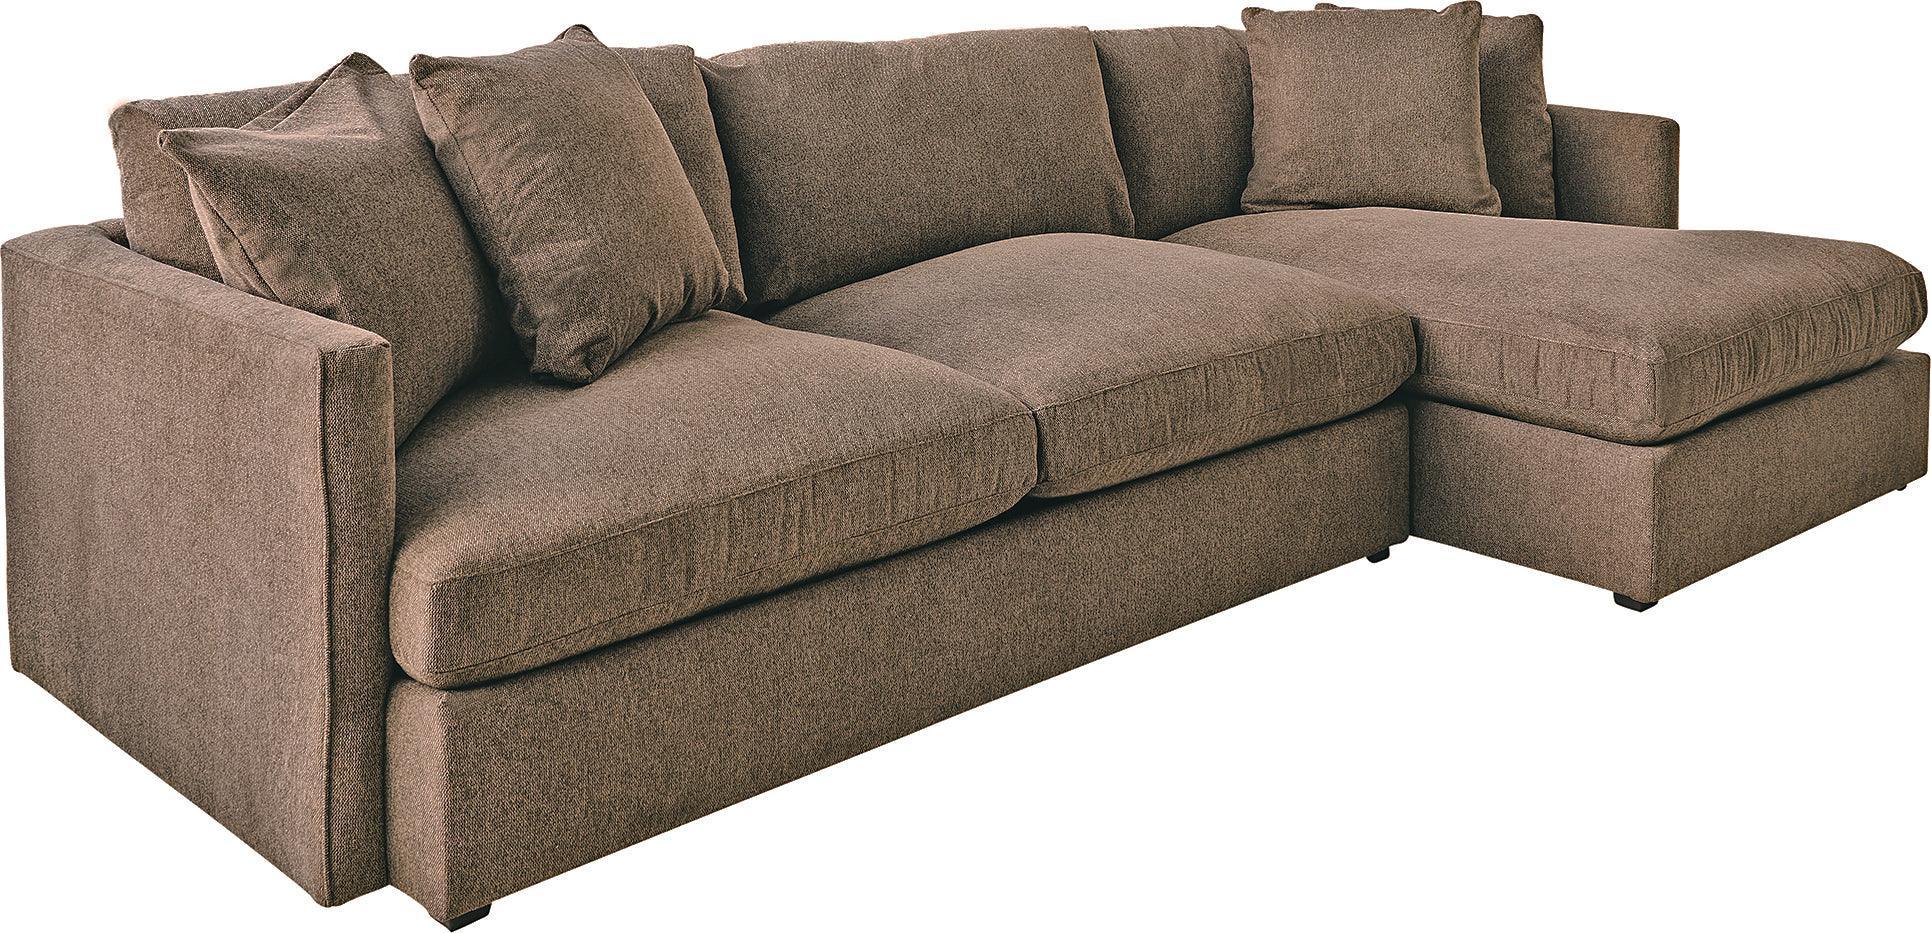 Elements Sectional Sofas - Maddox Right Arm Facing 2 Piece Sectional Set With Chaise Cocoa